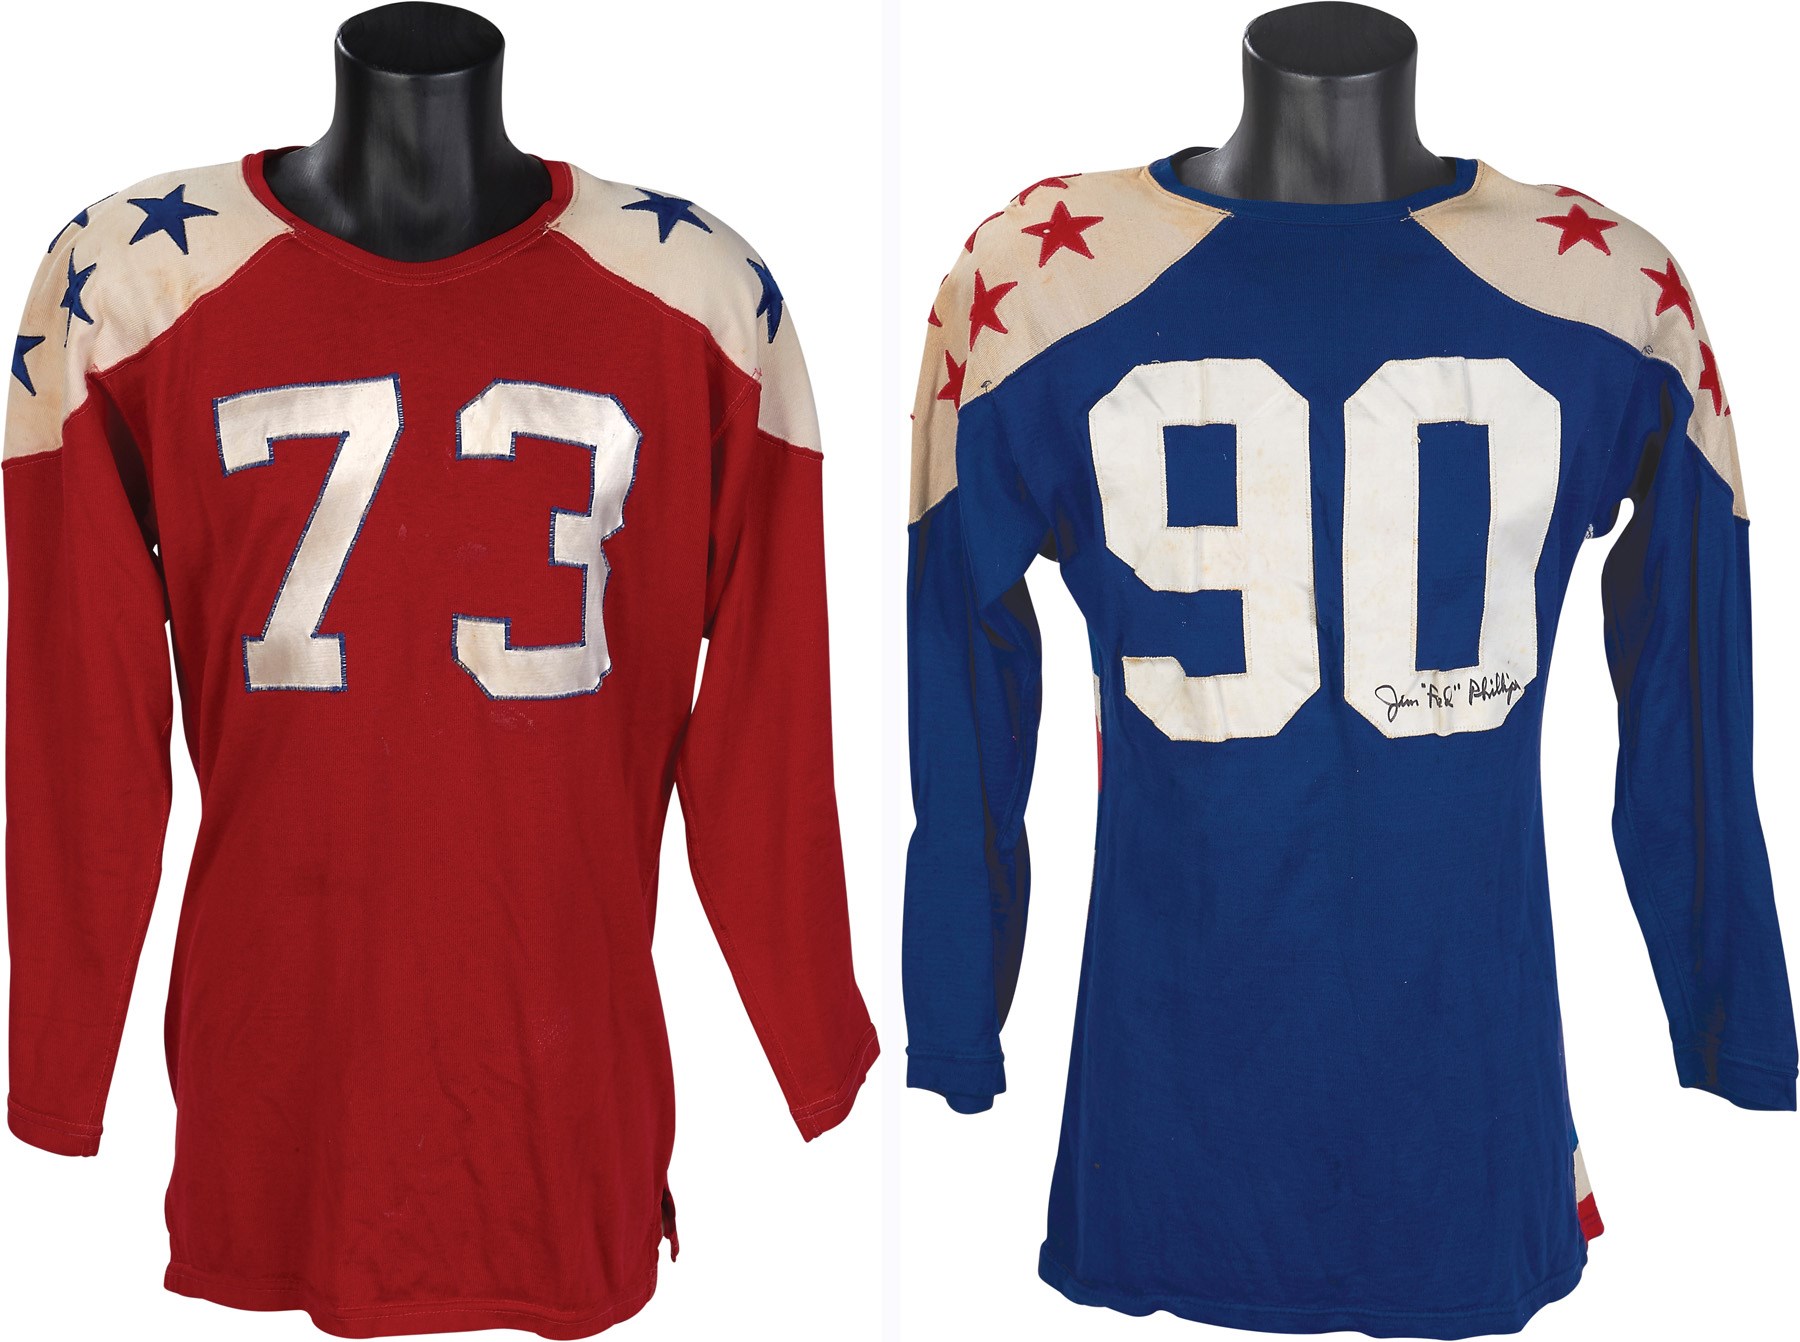 1950s Jimmy "Red" Phillips College All-Star Game Worn Jerseys (Photo Documentation)